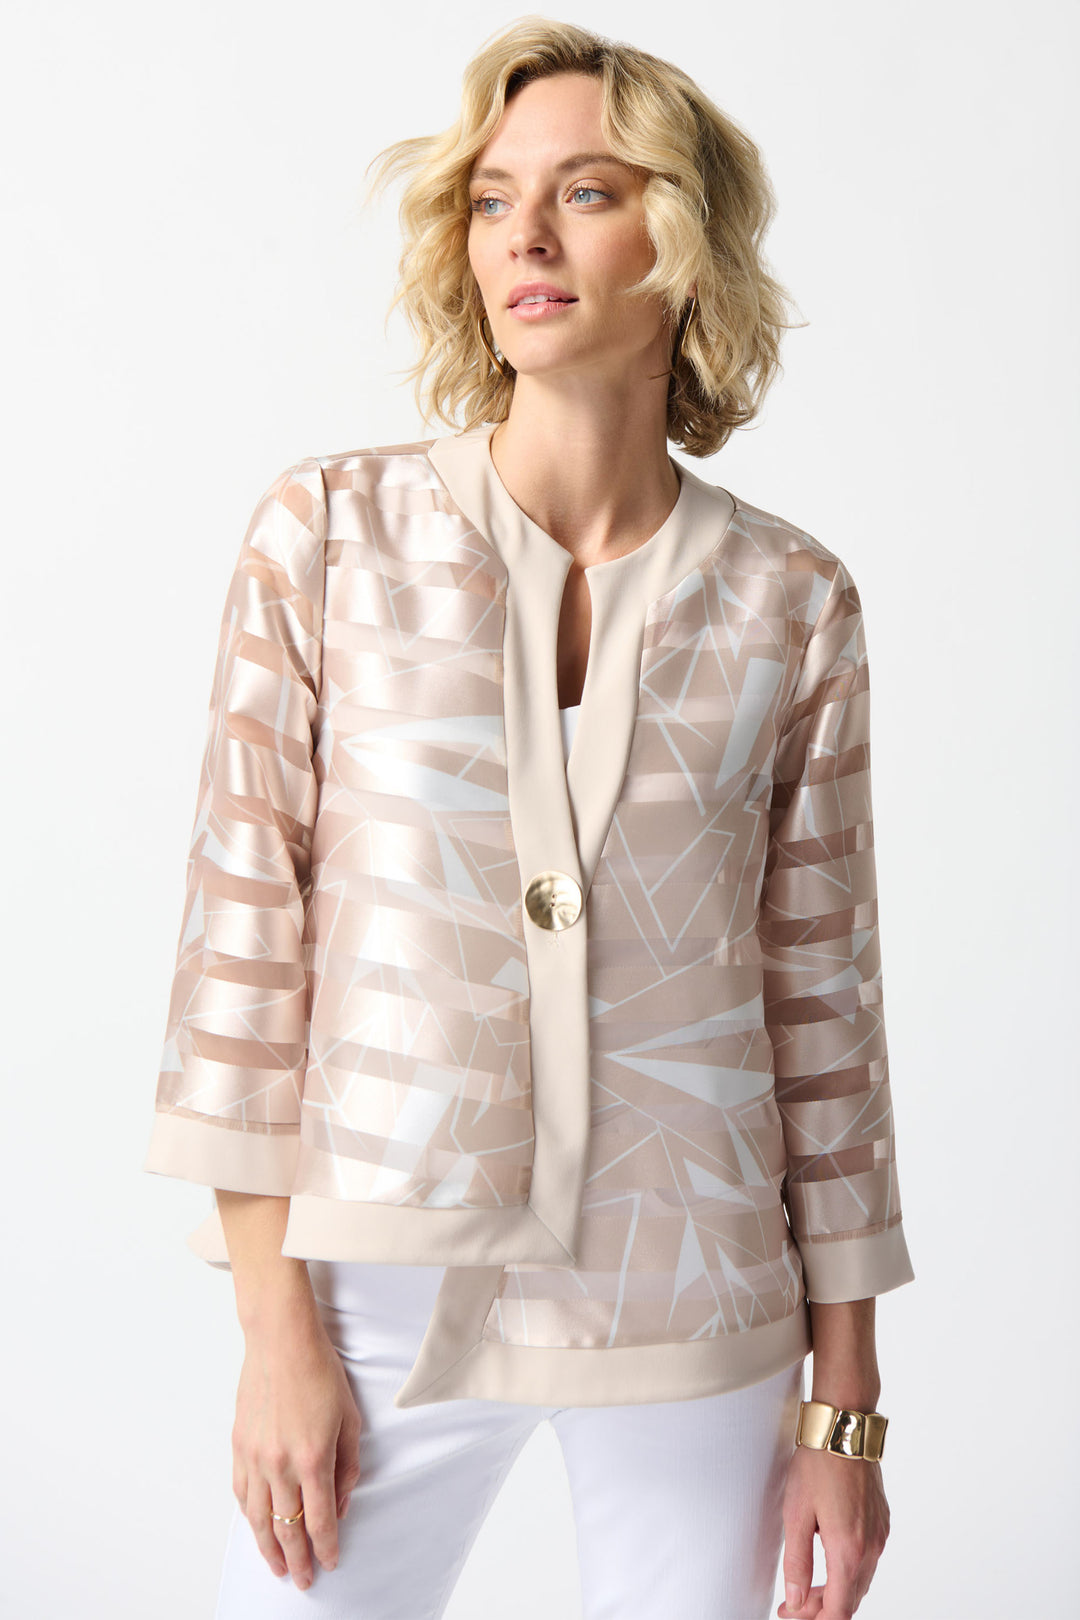 JOSEPH RIBKOFF Spring 2024 The boxy fit and gold button create a sleek and daring look, while the uneven front hem cut adds a touch of uniqueness.